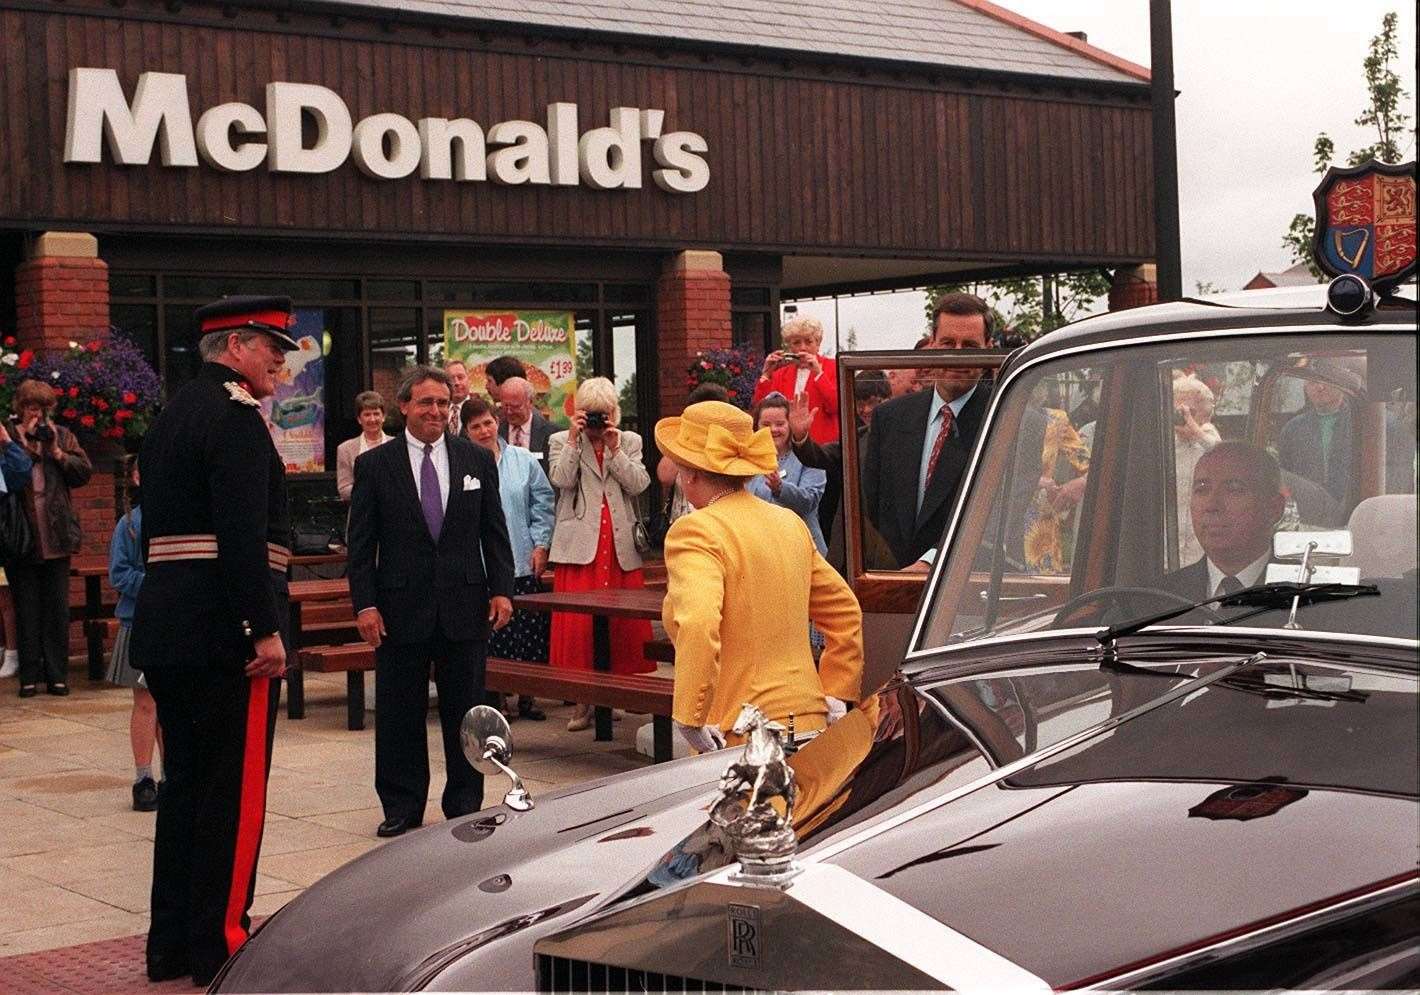 The Queen arrives at a McDonald’s restaurant in Cheshire in 1998 (PA)